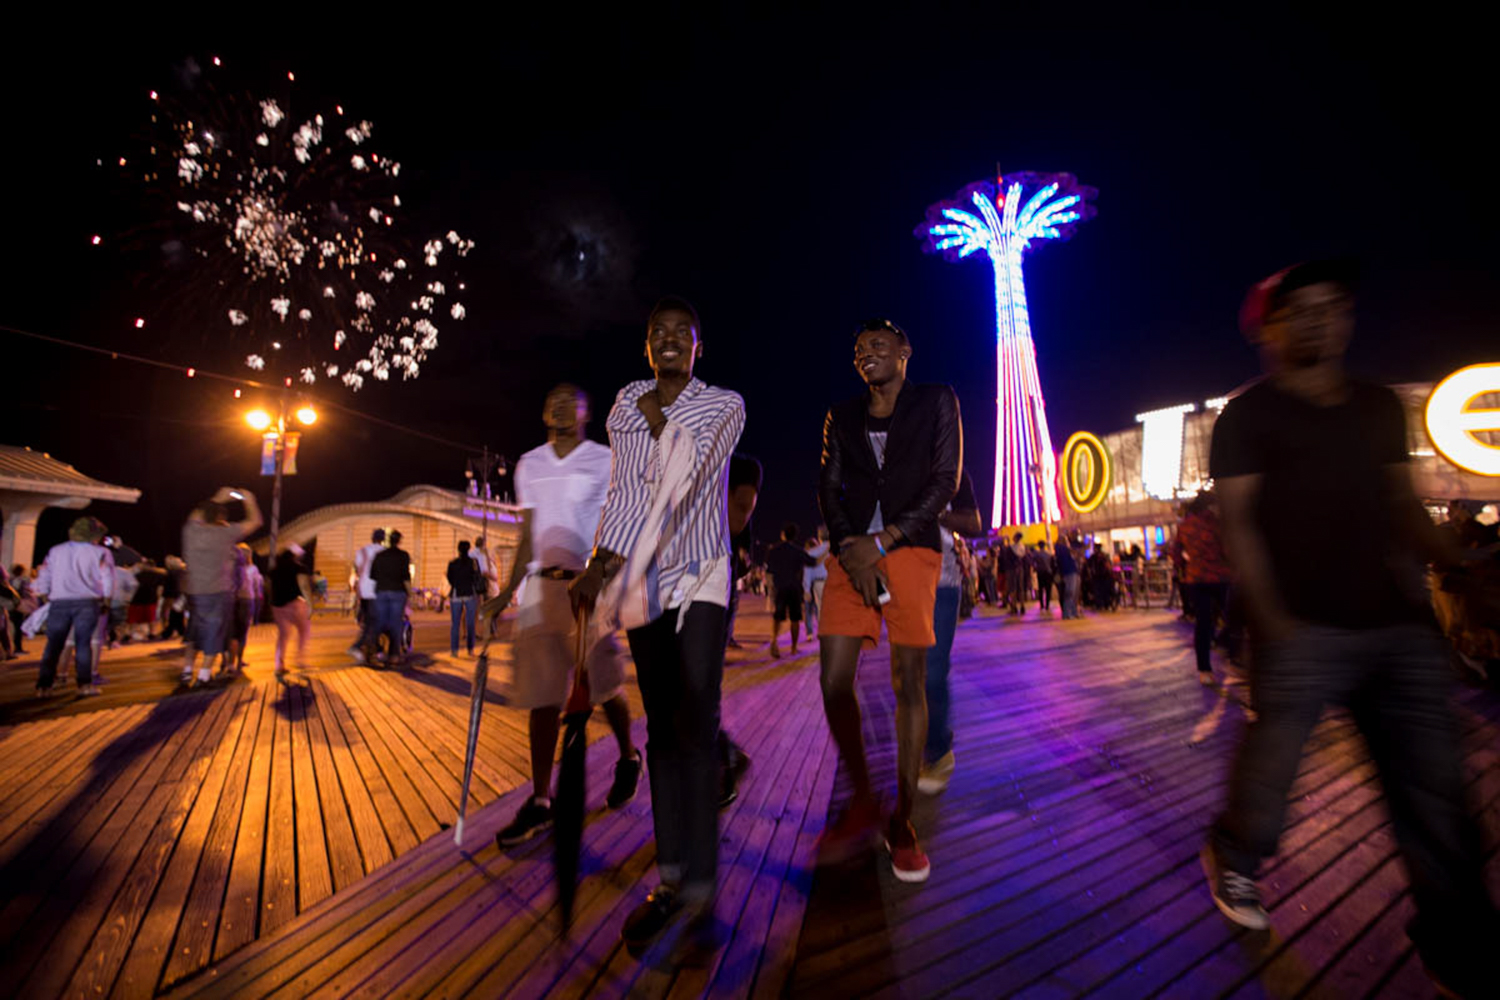 Michael Ighodaro, Williams Rashidi and friends at the Coney Island Boardwalk during the fourth of July fireworks display. Though the numbers haven’t been formally tracked, immigration equality advocates say that LGBT Nigerians, especially gay men, are increasingly looking to the United States for asylum. The exit of LGBT people seeking asylum from countries like Nigeria and Uganda, that have intolerant laws is unprecedented. Coney Island, New York, July, 2014